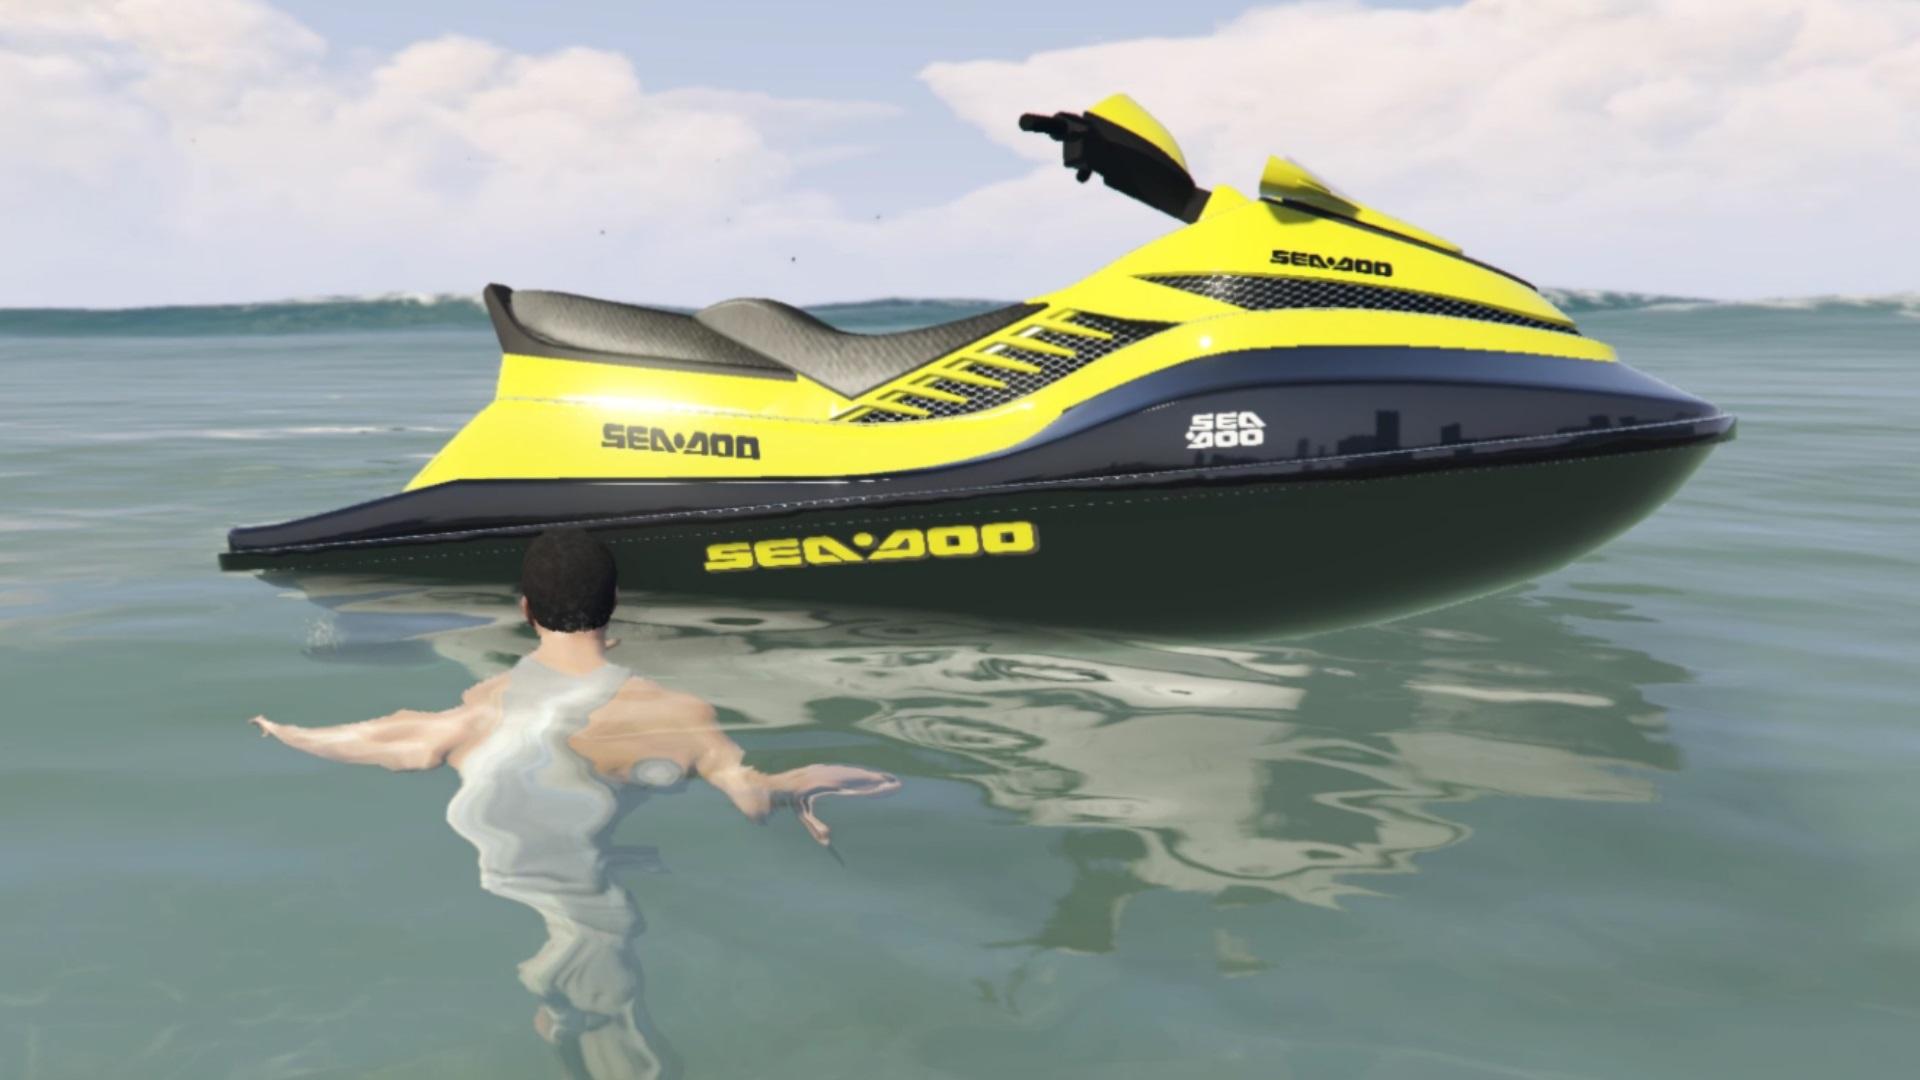 Jet Ski Sea Doo Skin Gta5 Mods regarding The Most Amazing and also Gorgeous how to jet ski in gta 5 pertaining to Your house